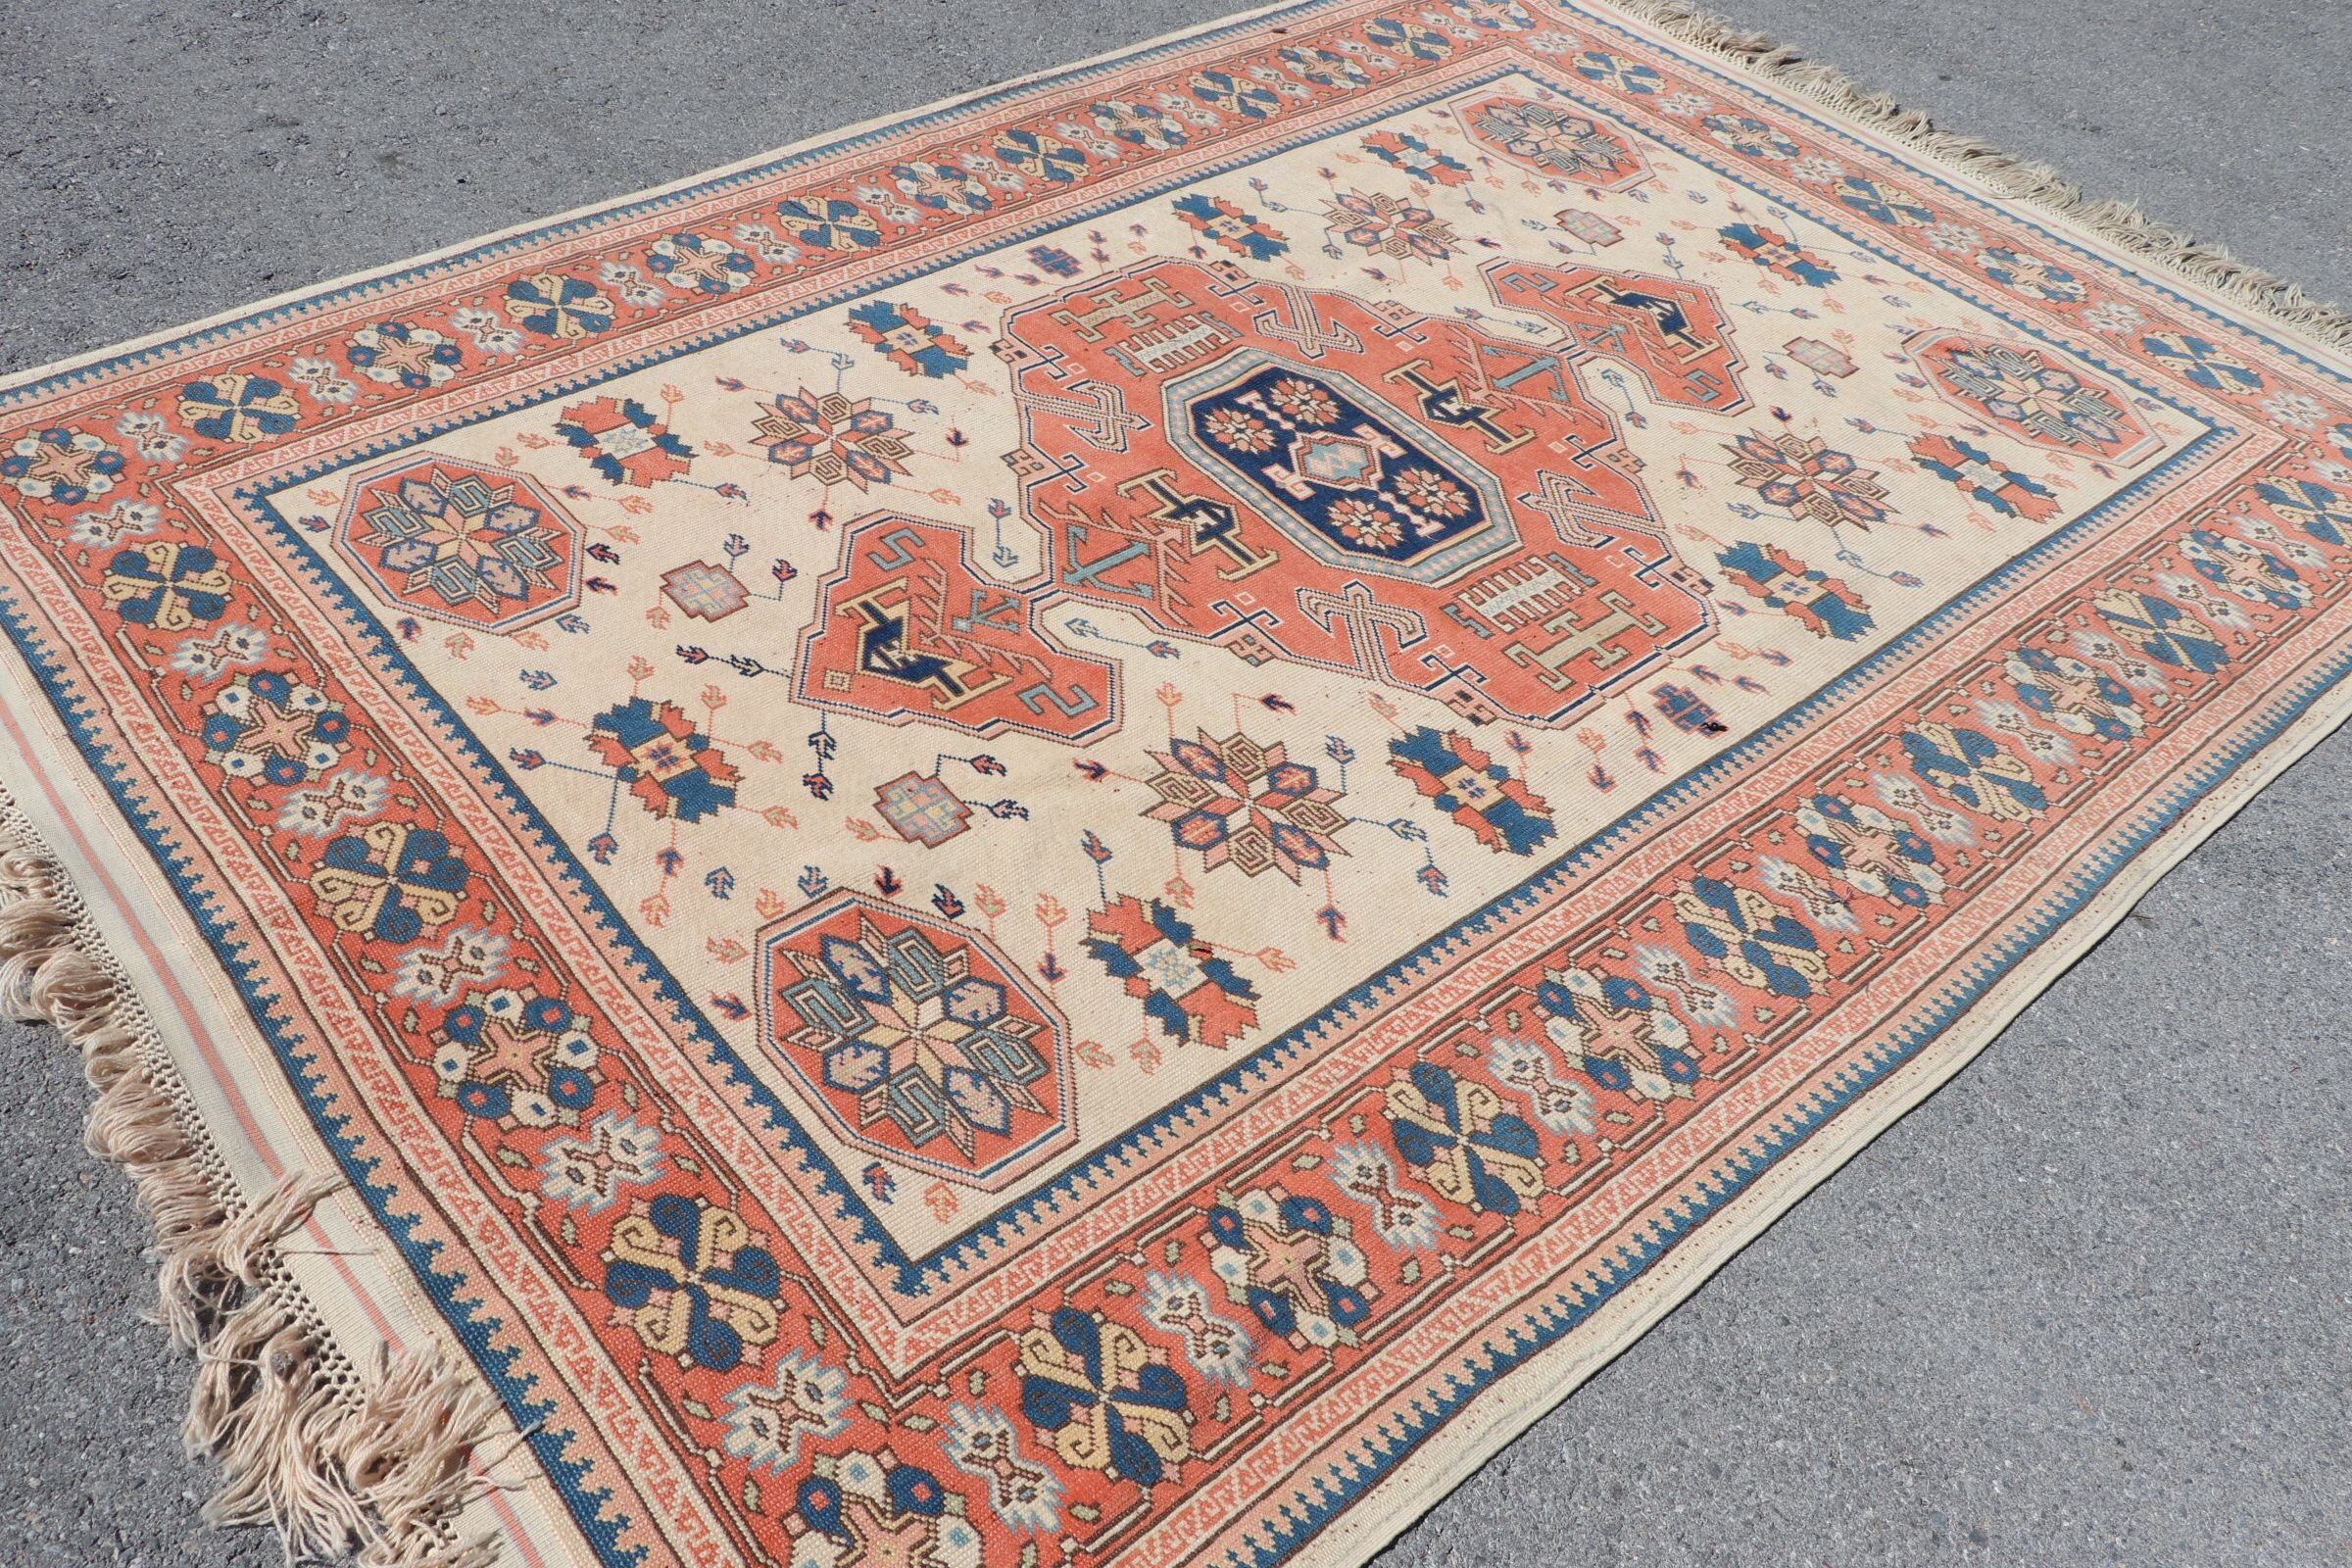 6.7x9.4 ft Large Rug, Anatolian Rug, Turkish Rug, Vintage Rugs, Dining Room Rugs, Old Rug, Red Bedroom Rugs, Rugs for Salon